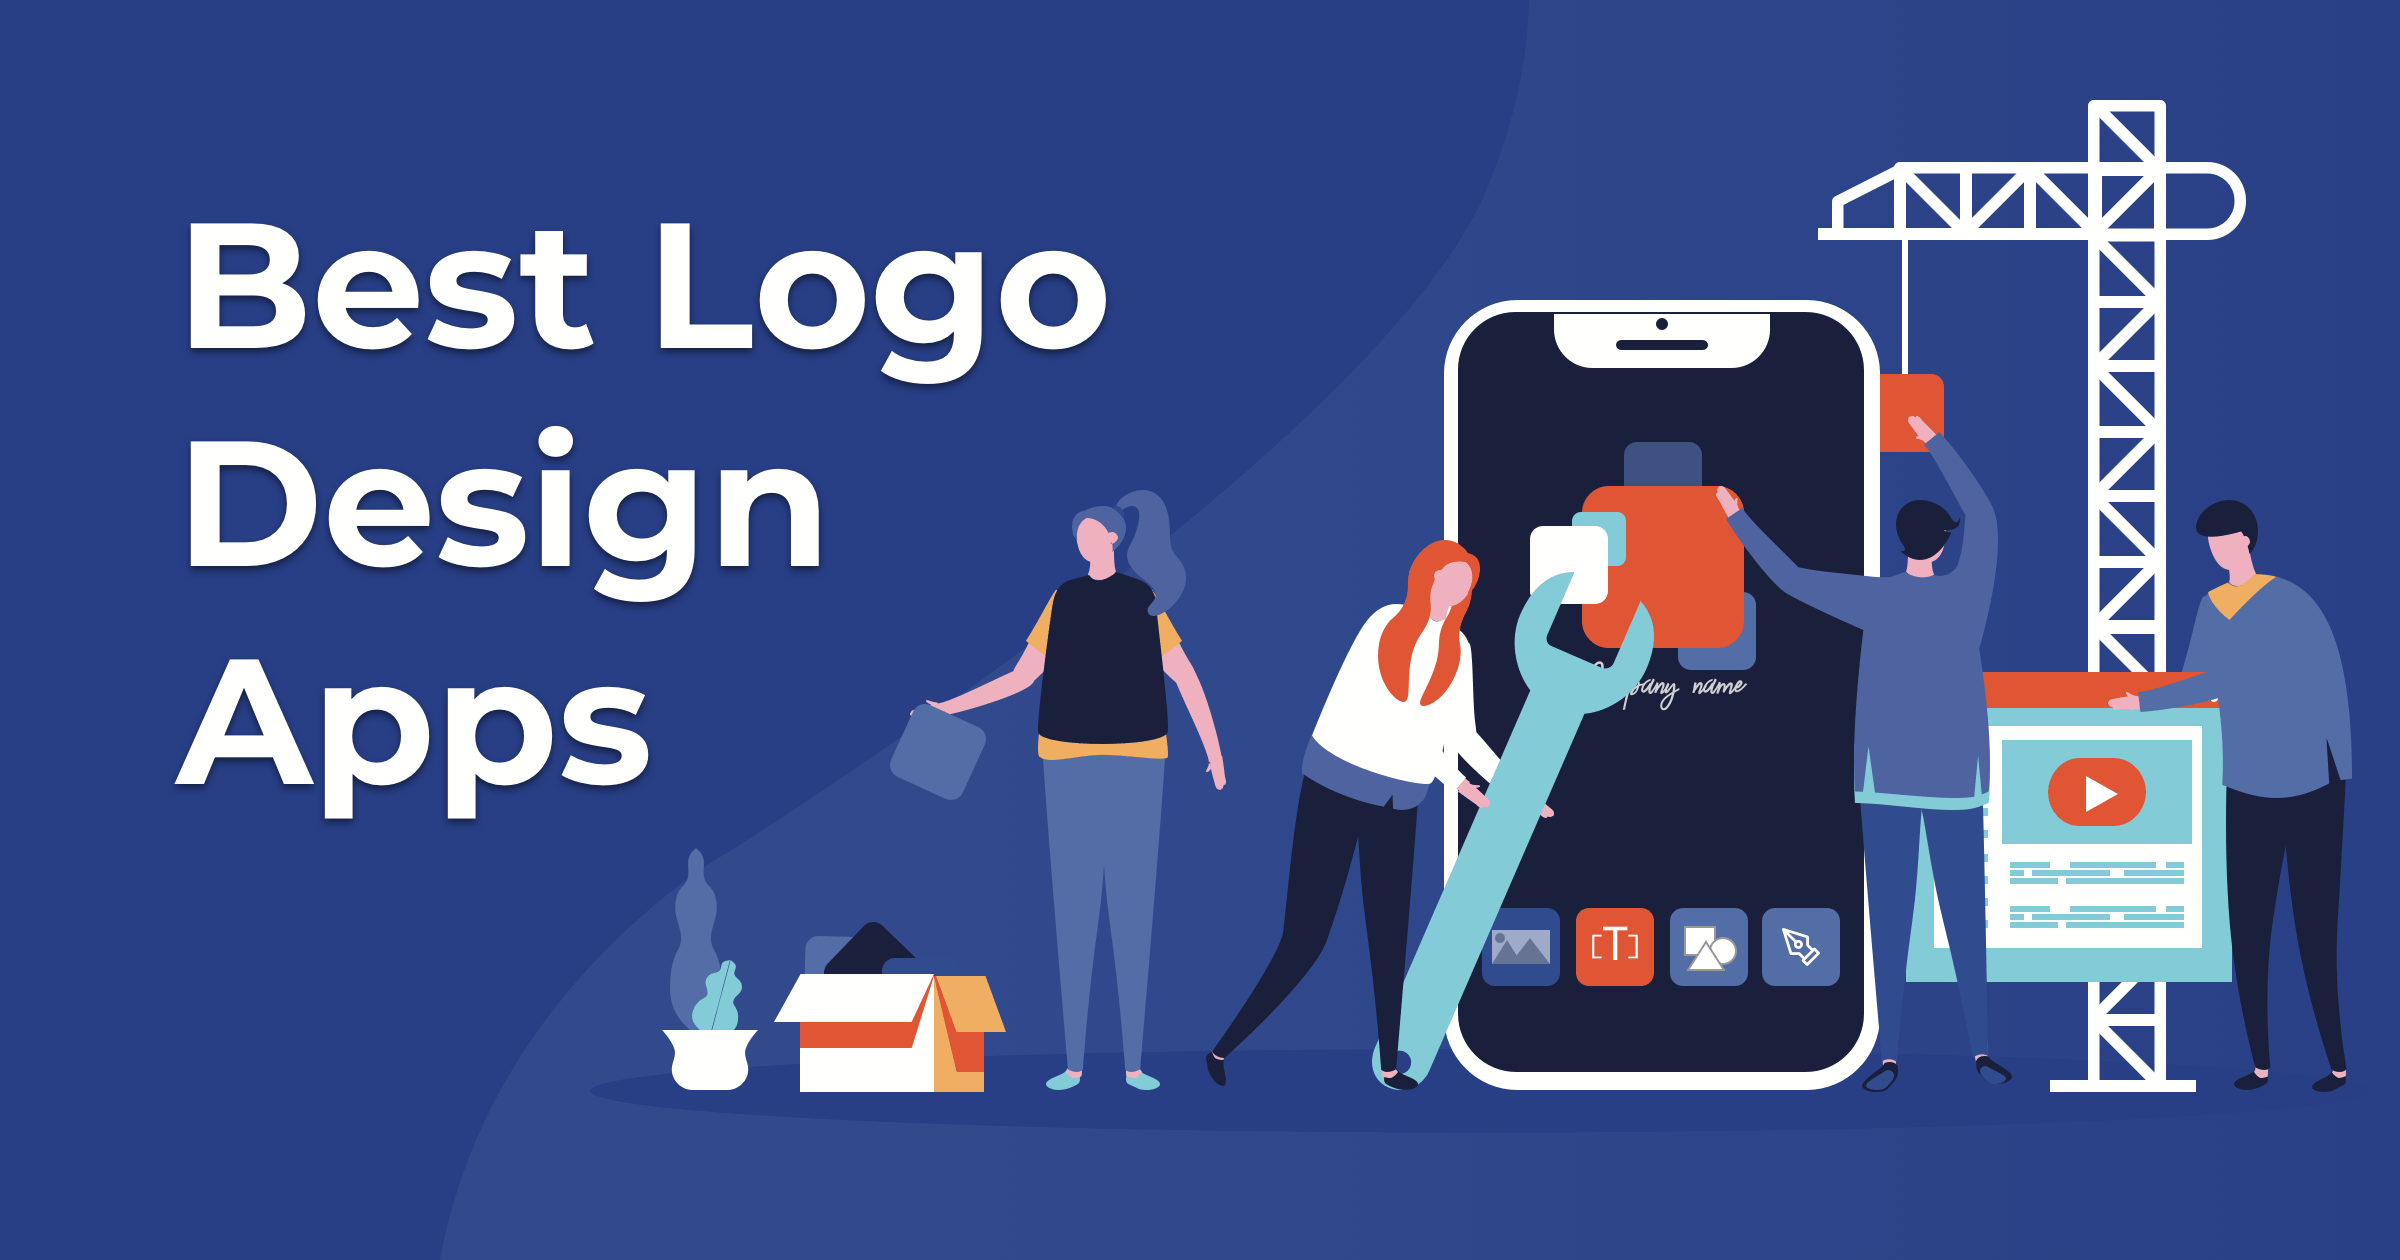 The best apps to create logos